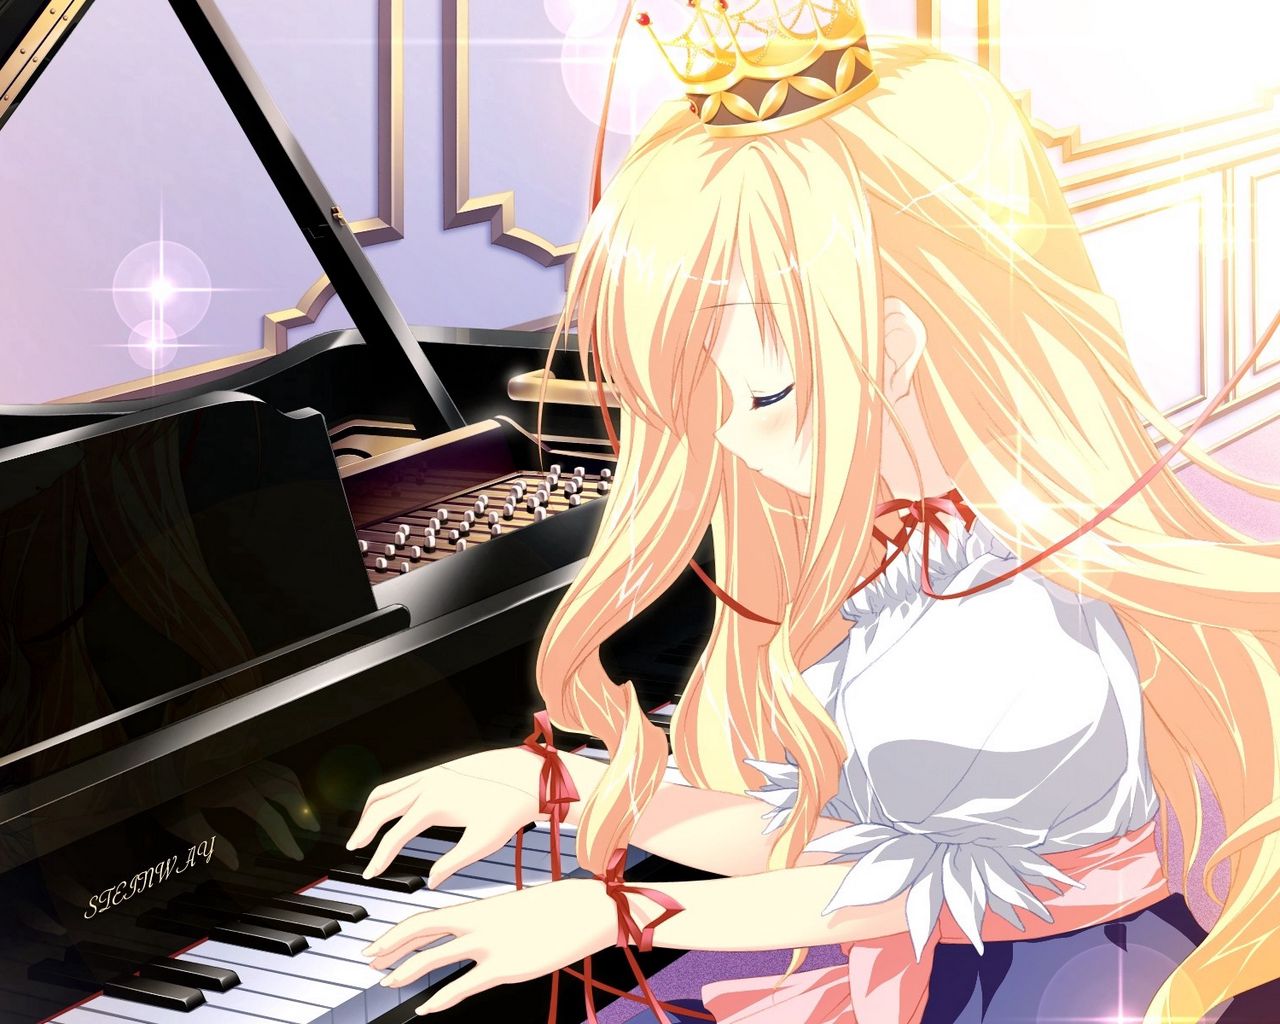 Download wallpaper 1280x1024 girl, blonde, piano, play, music standard 5:4  hd background